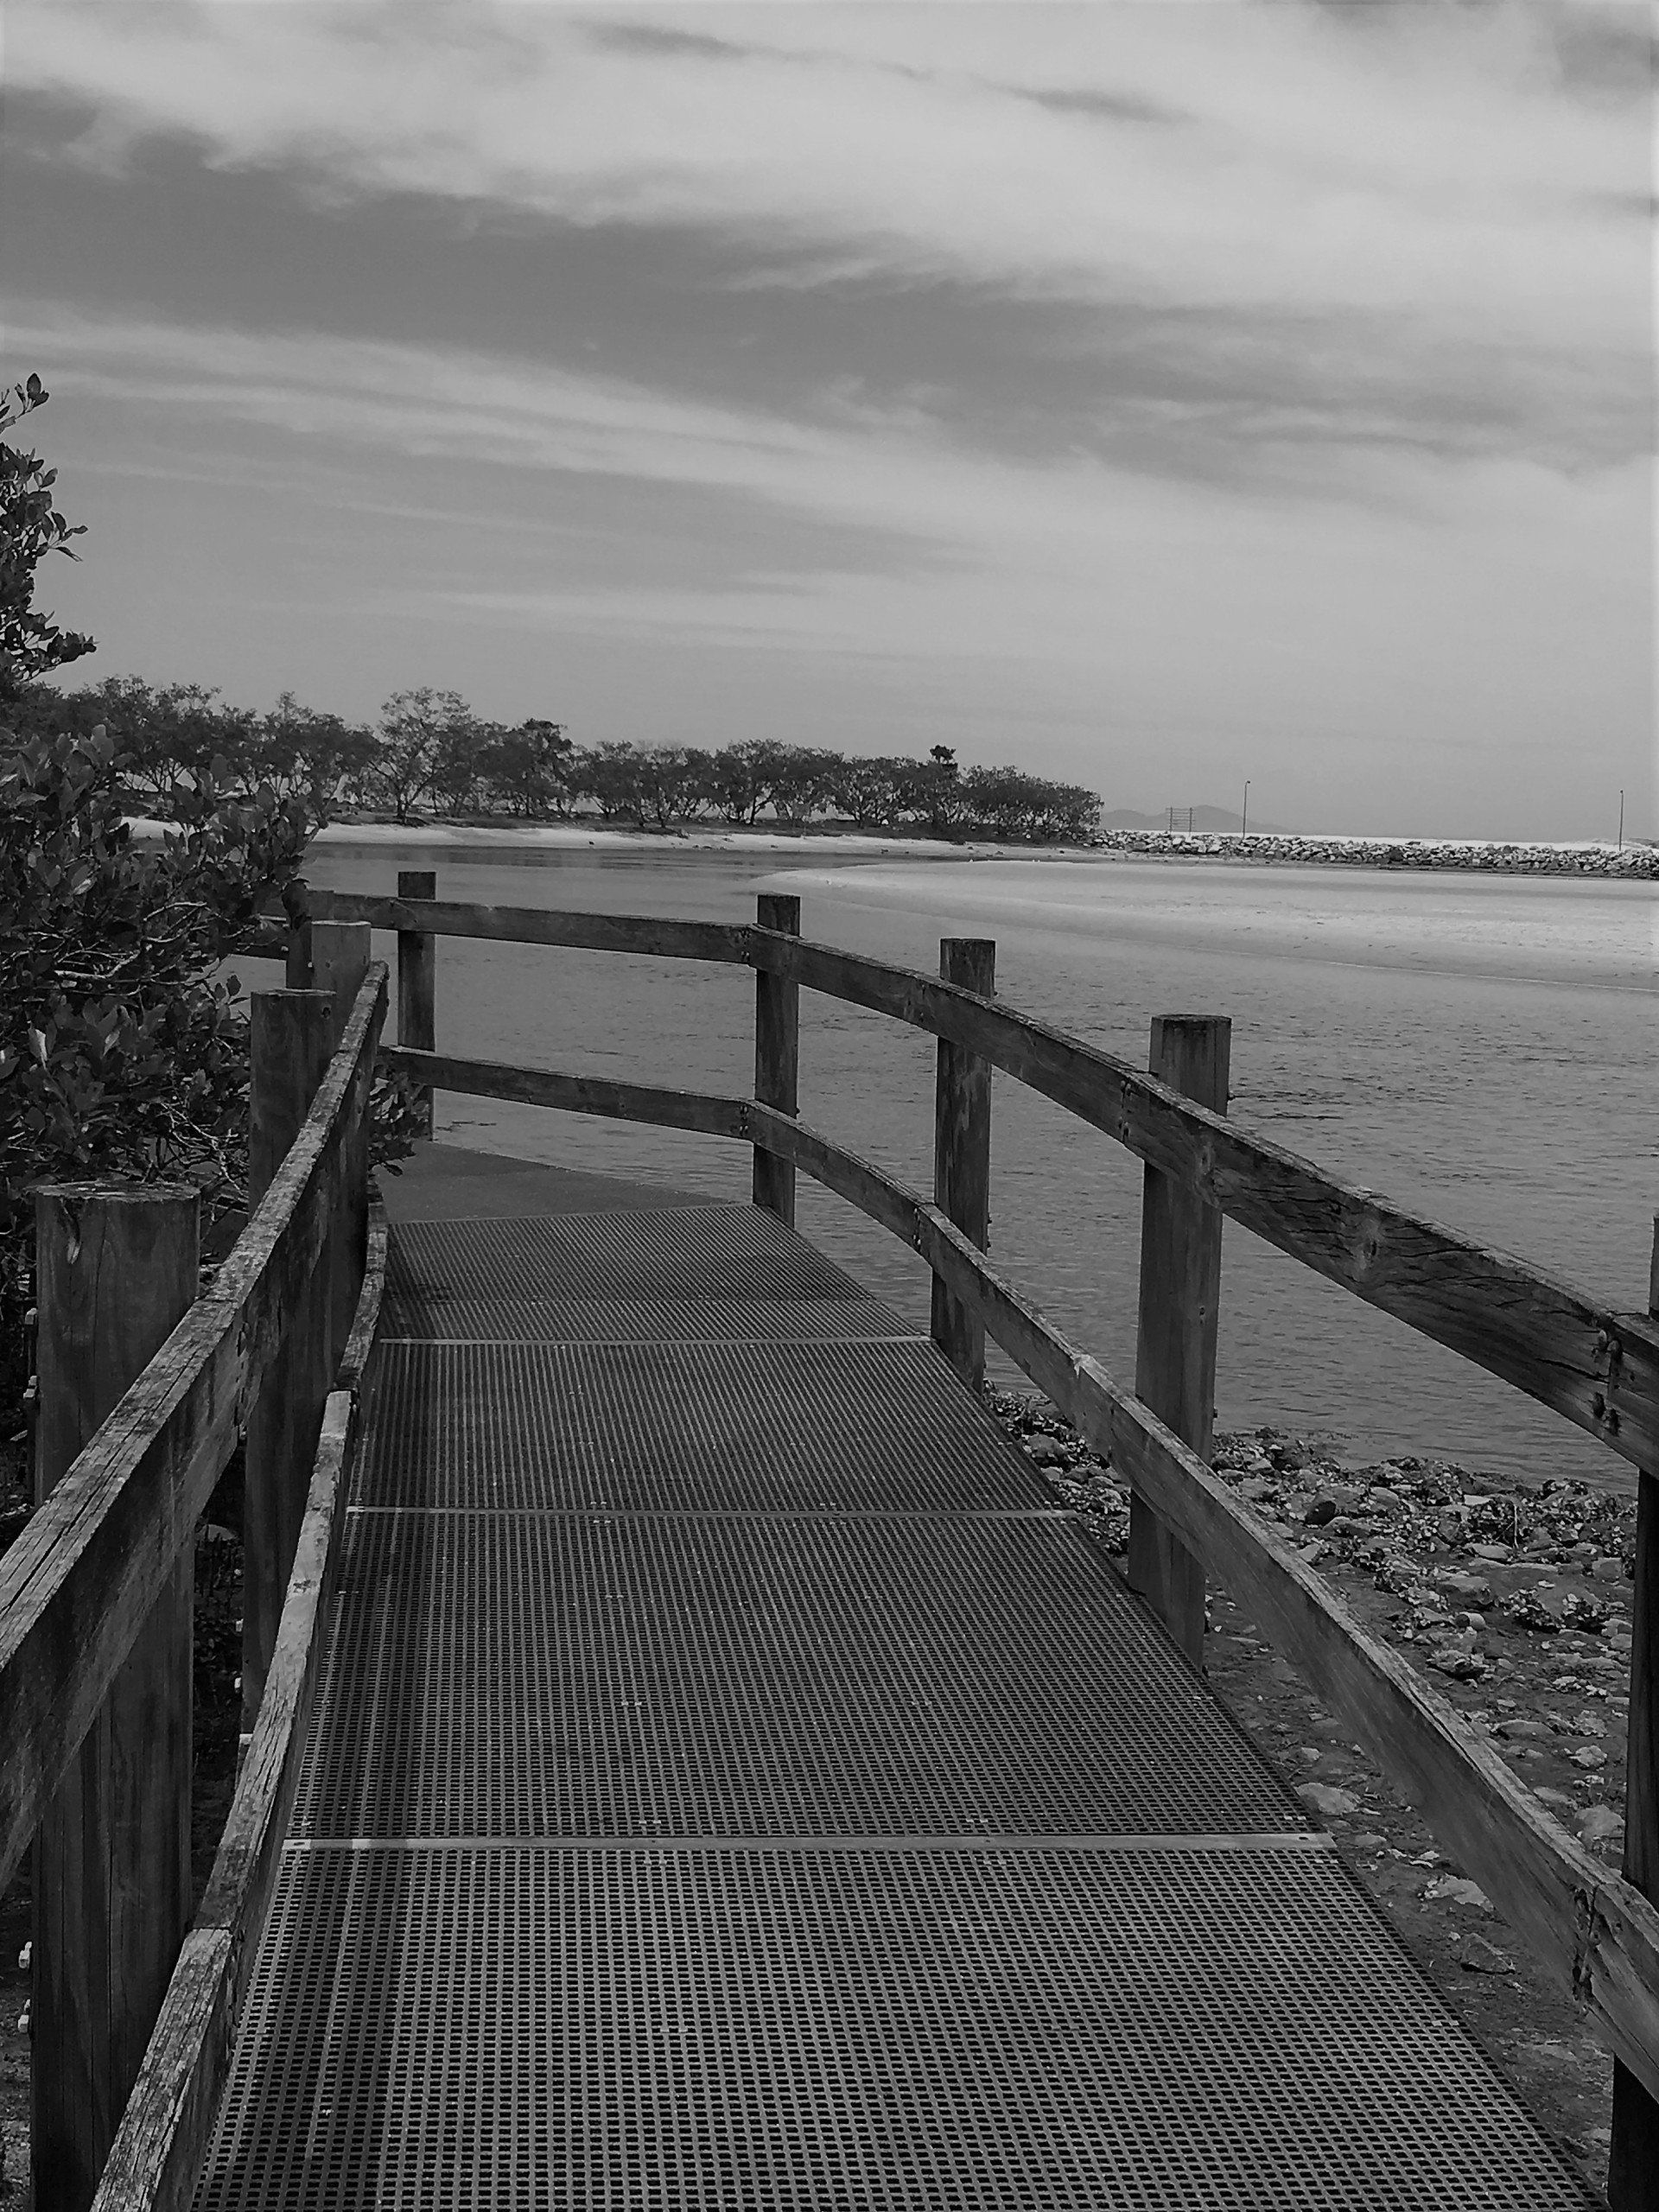 Nambucca Heads boardwalk - a local must visit attraction - image